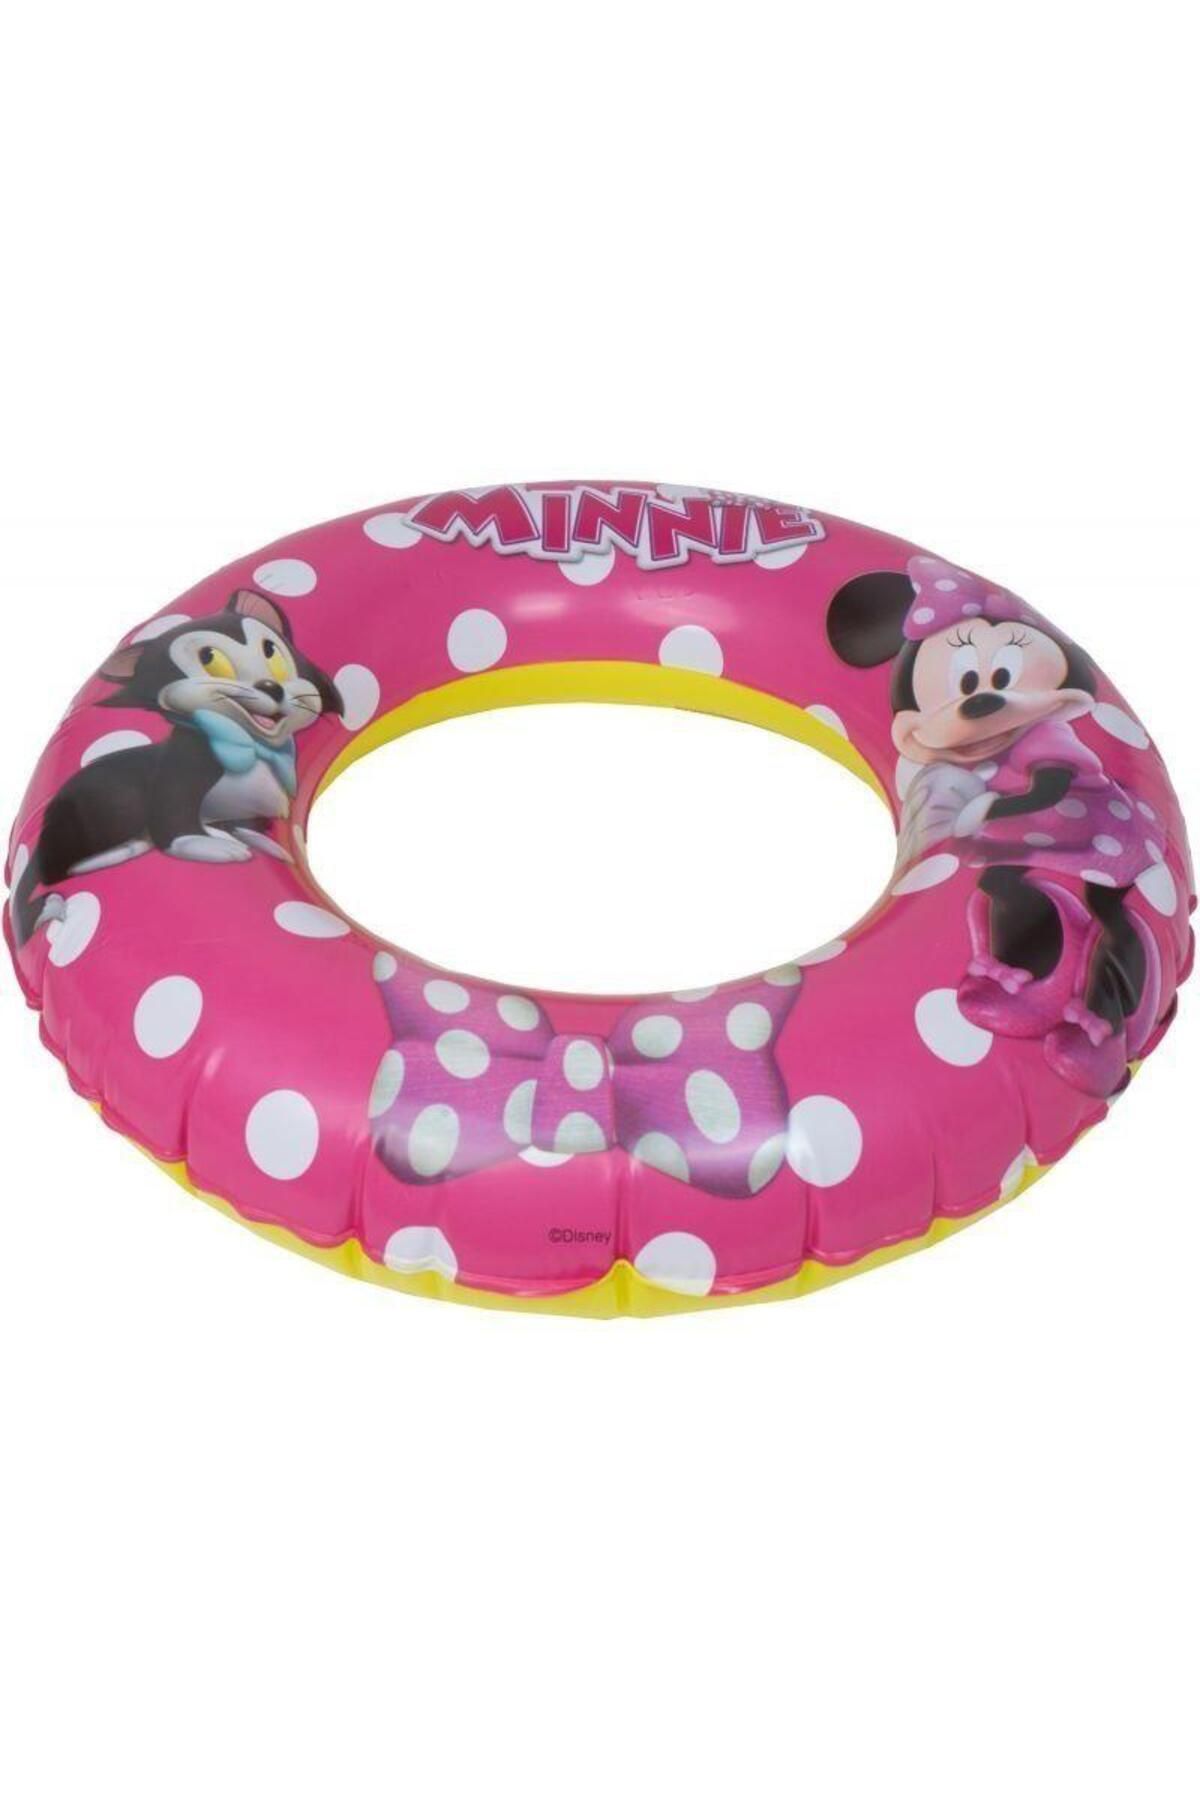 Ali The Stereo Minnie Mouse Simit 51 Cm Bestway - 91040 (Lisinya) alithestereo